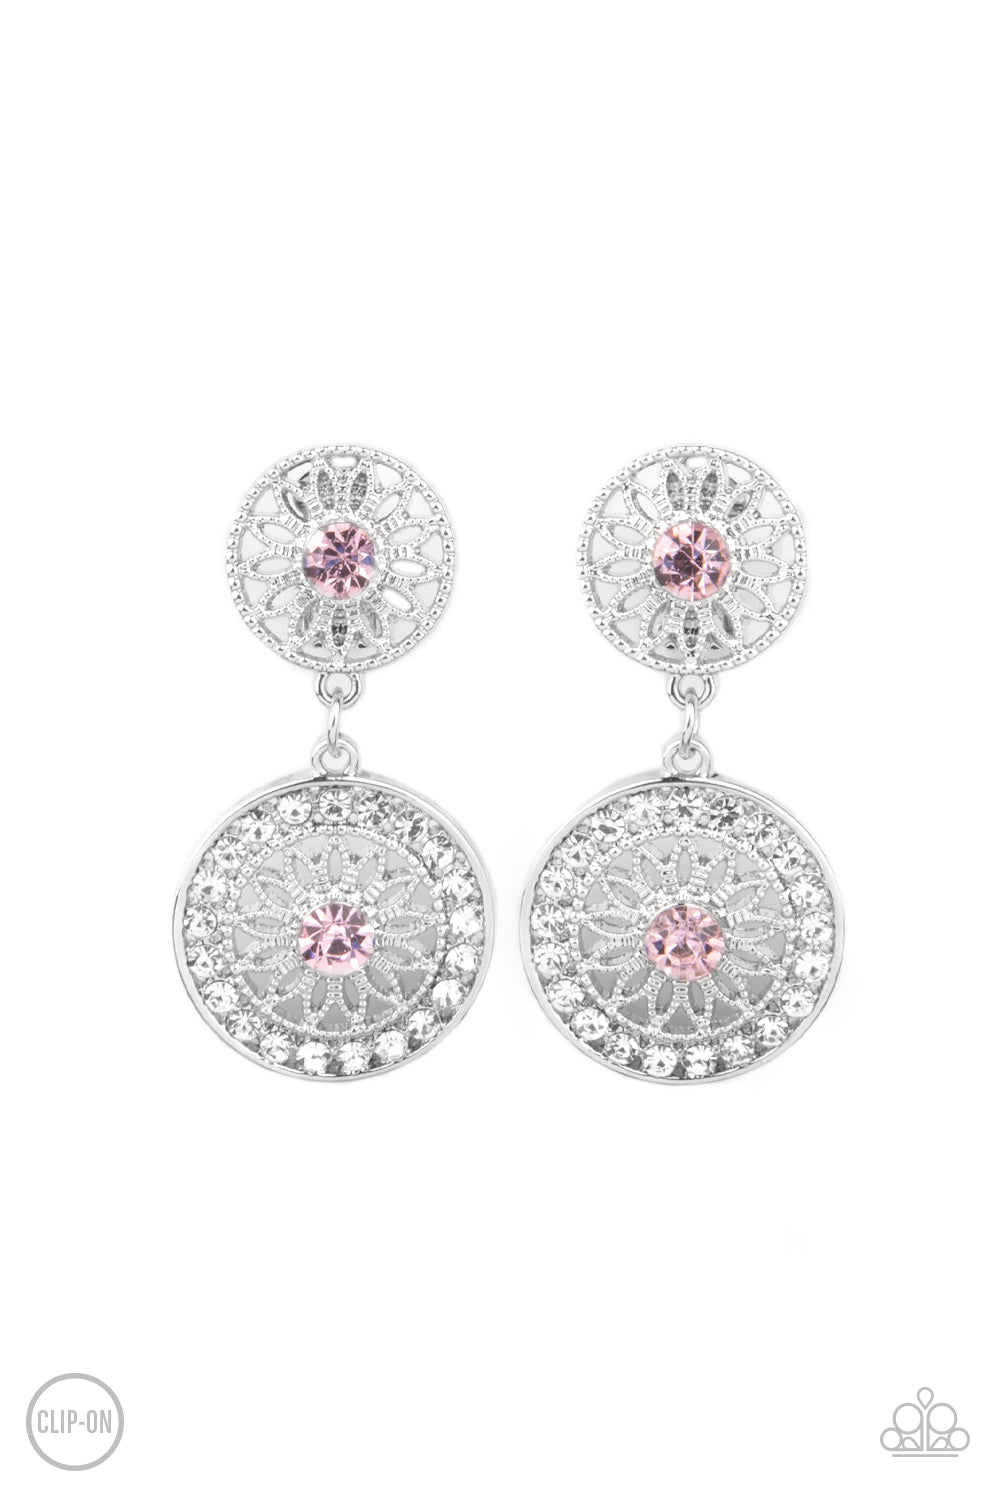 Life of The Garden Party Pink Clip-On Earring - Paparazzi Accessories  Dotted with glittery pink rhinestone centers, shimmery silver floral frames link into a whimsical lure. The lower frame is bordered in glassy white rhinestones for a timeless finish. Earring attaches to a standard clip-on fitting.  All Paparazzi Accessories are lead free and nickel free!  Sold as one pair of clip-on earrings.